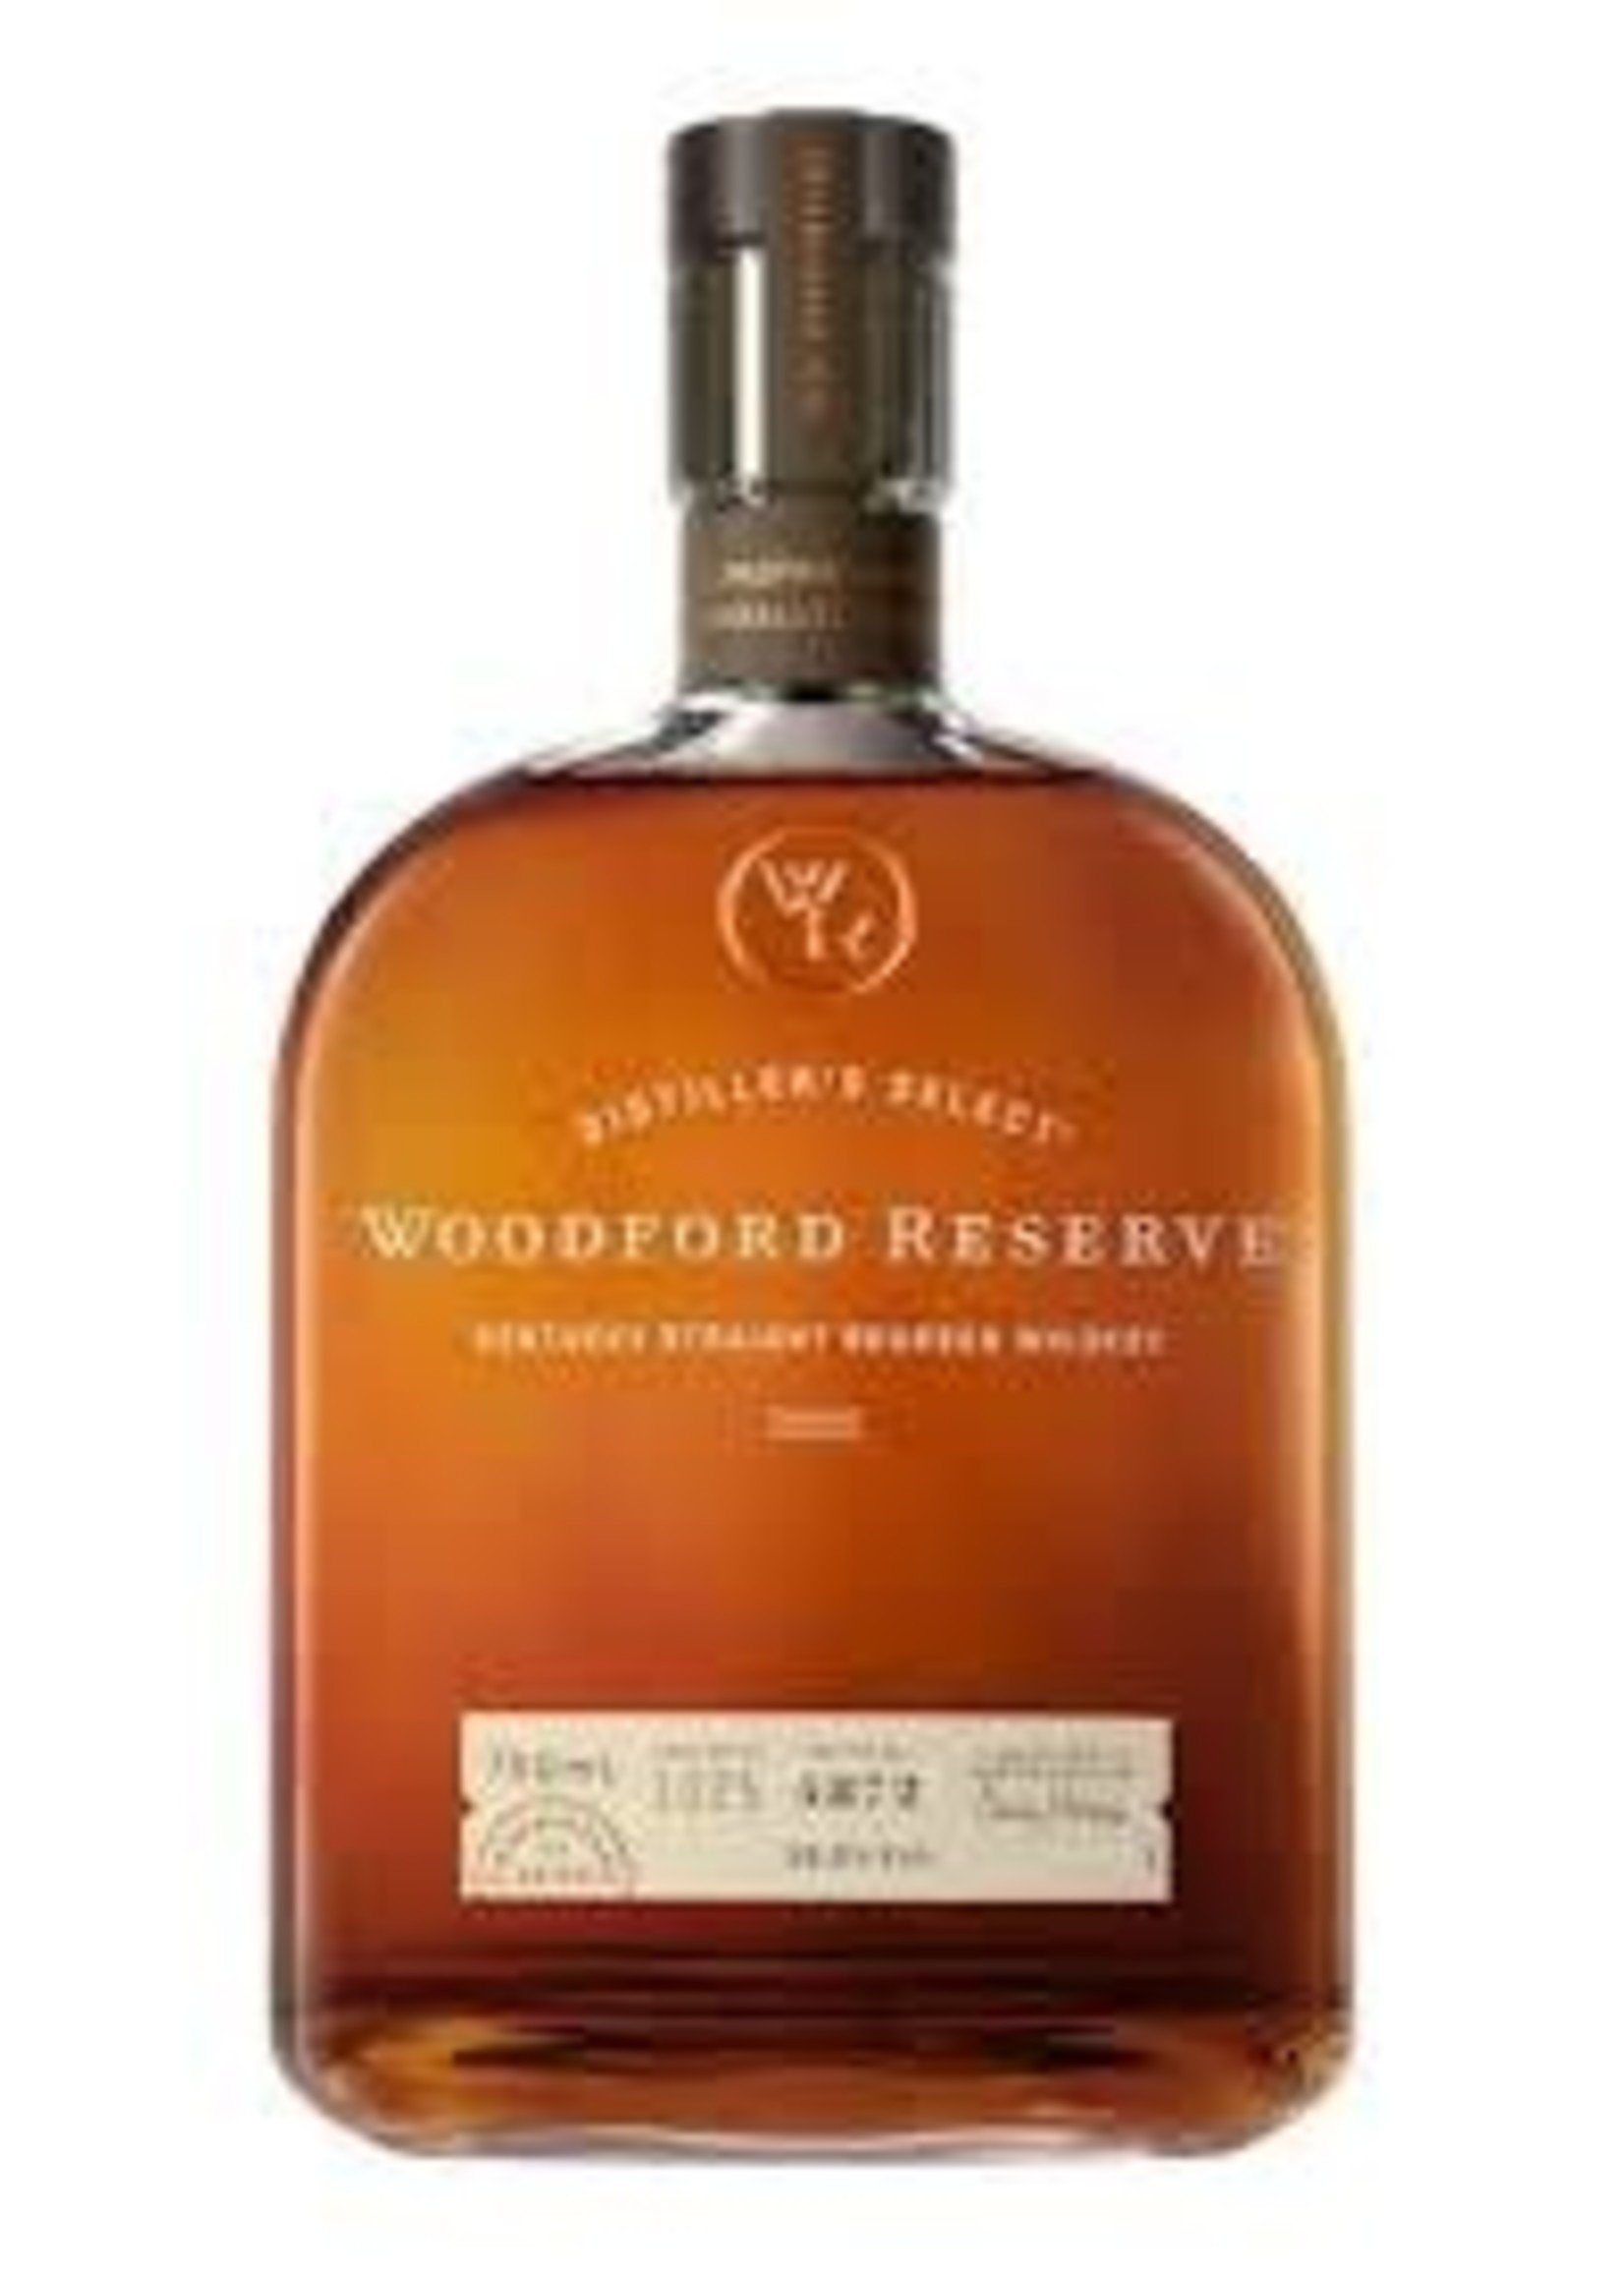 Woodford Res Bb Woodford Reserve / Bourbon